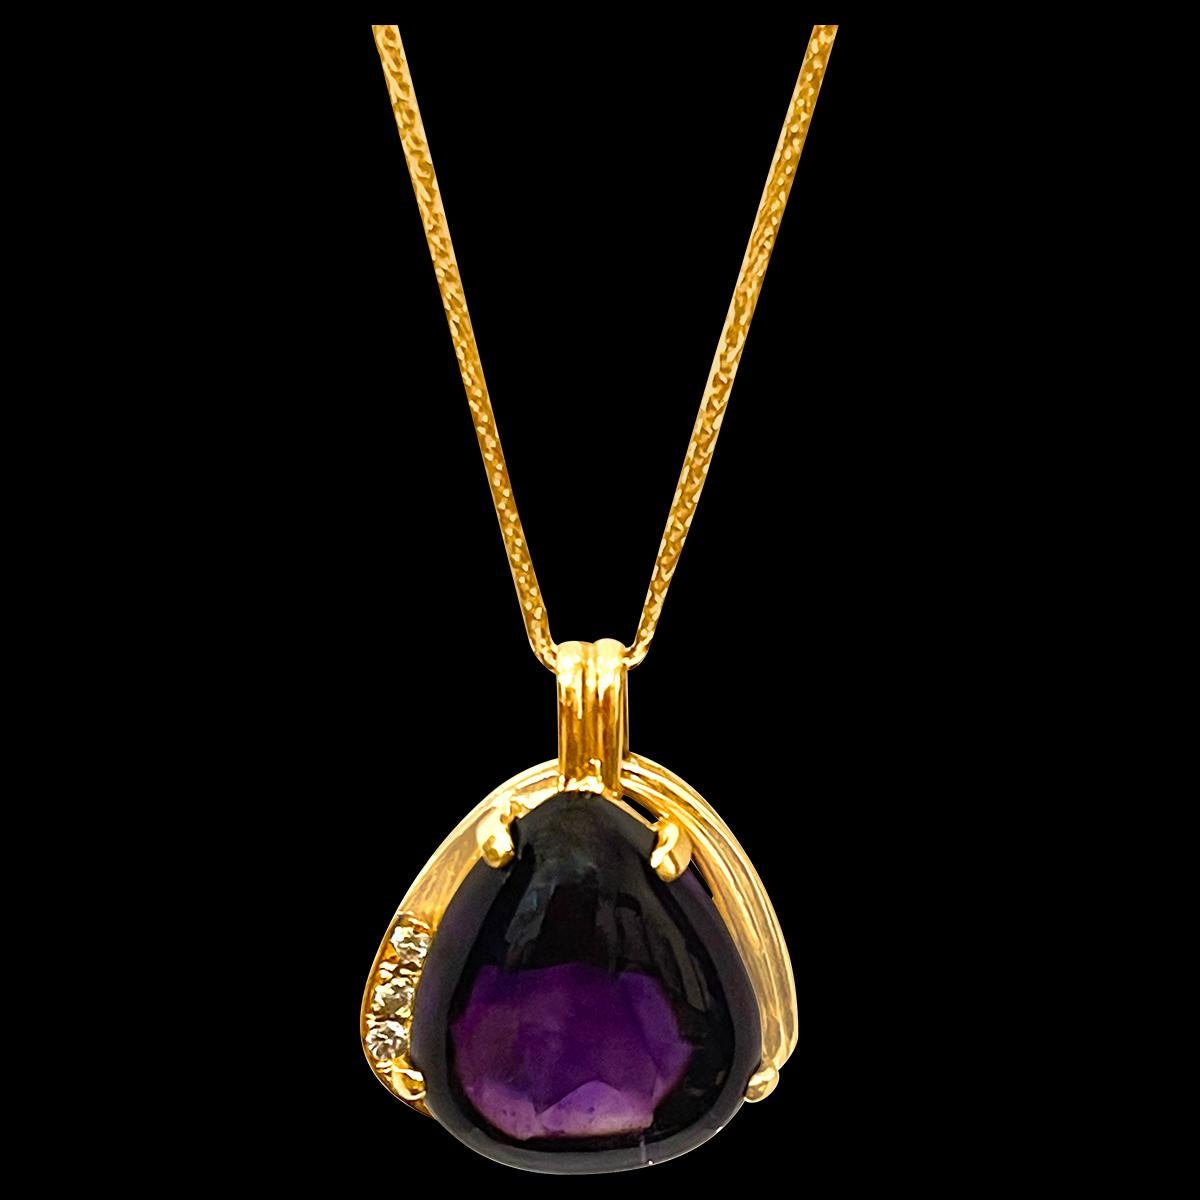 Pear Cut 10 Carat Tear Drop Amethyst and Diamonds Pendent Necklace 18 Karat Yellow Gold For Sale